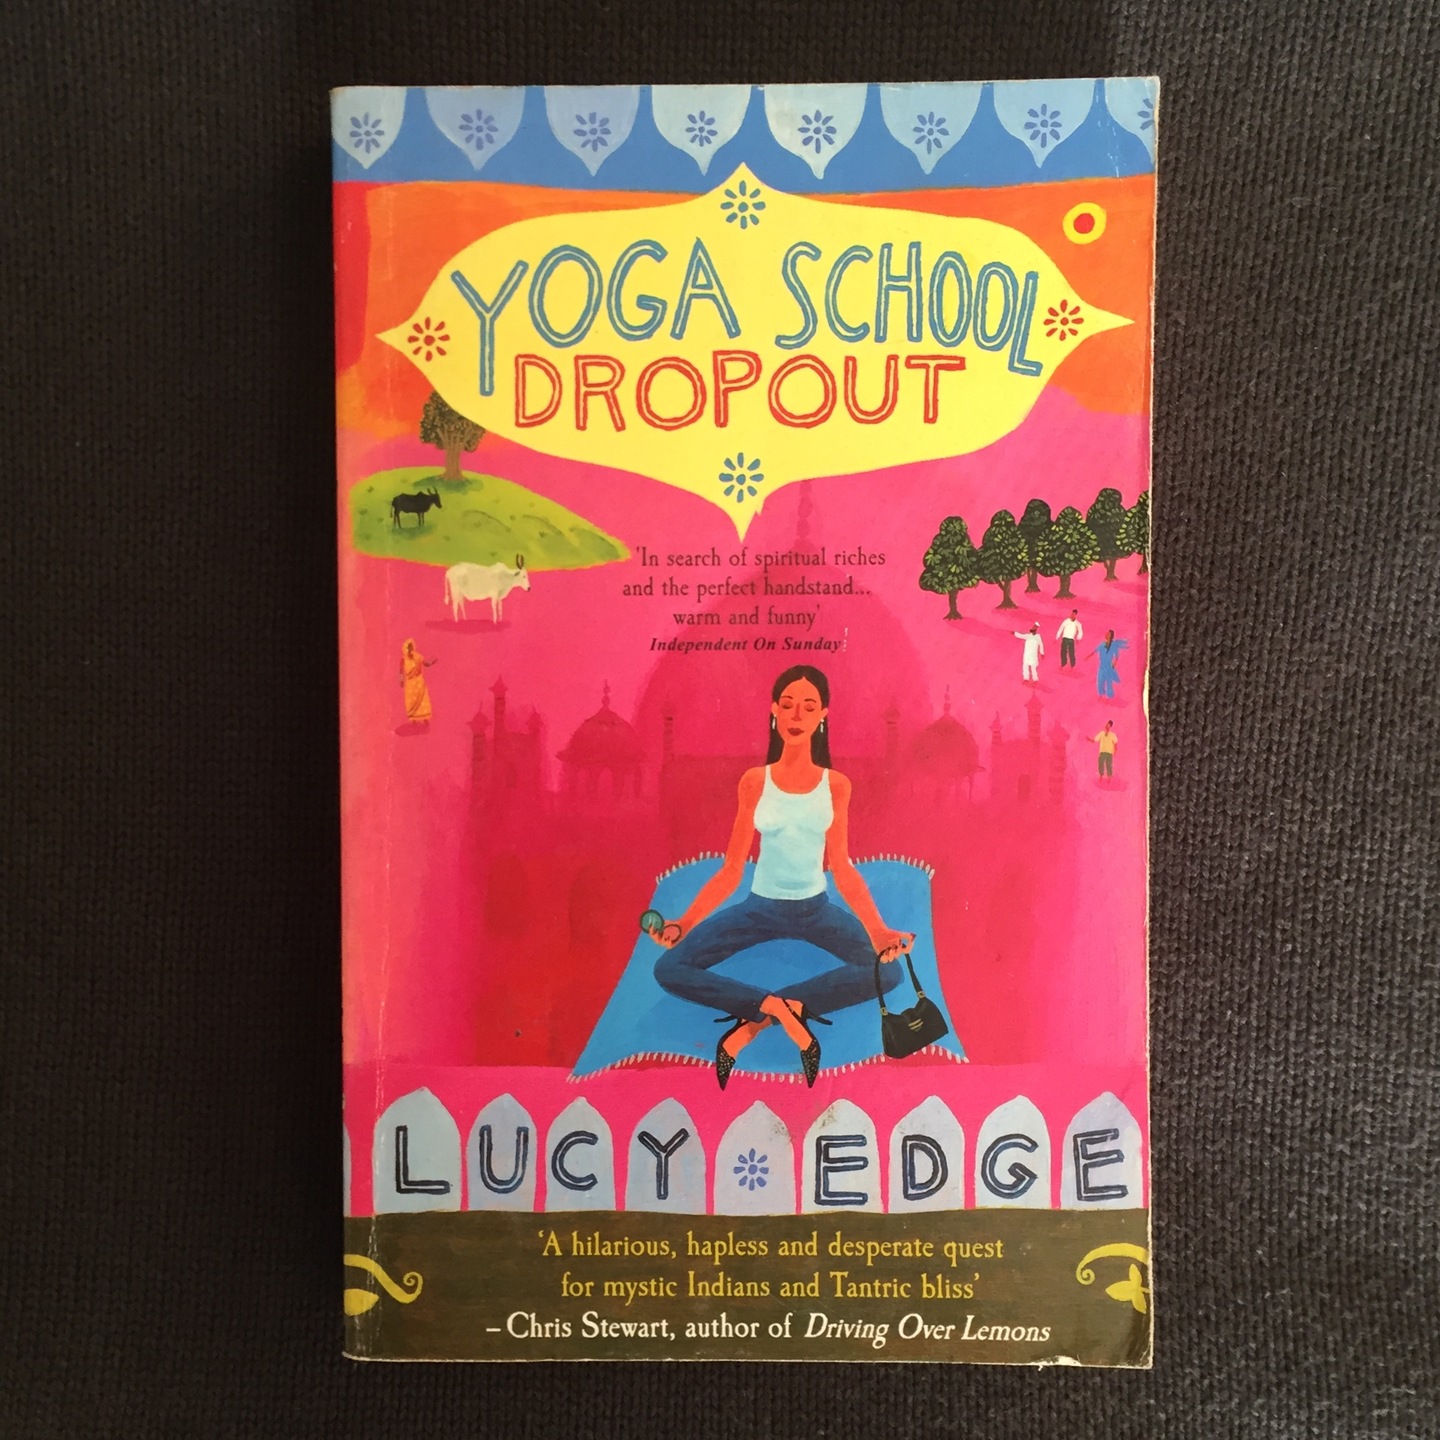 Yoga School Dropout by Lucy Edge [Paperpback]